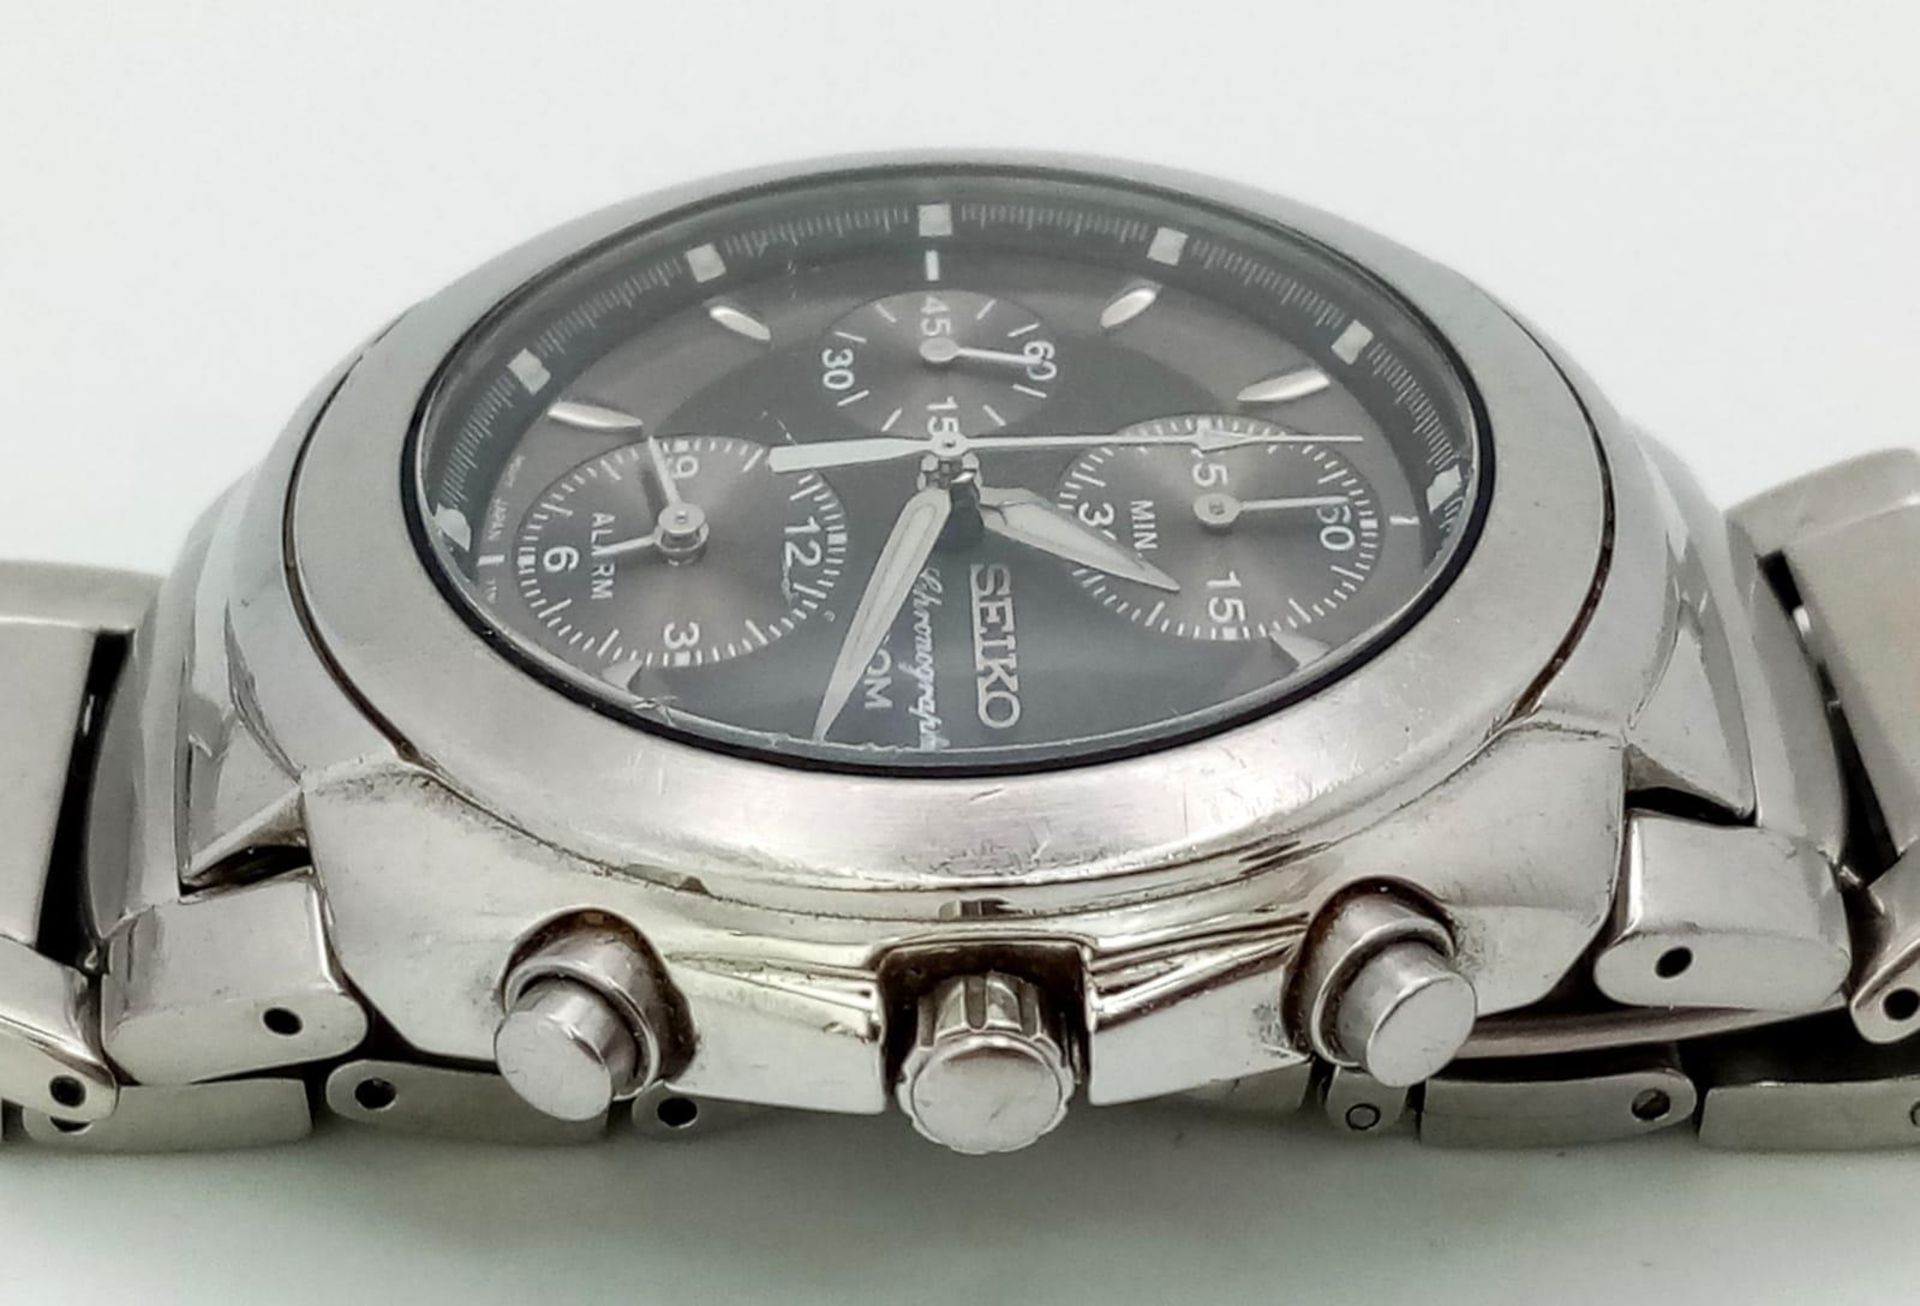 A Seiko Chronograph Quartz Gens Watch. Stainless steel strap and case - 40mm. Silver tone dial - Image 6 of 13